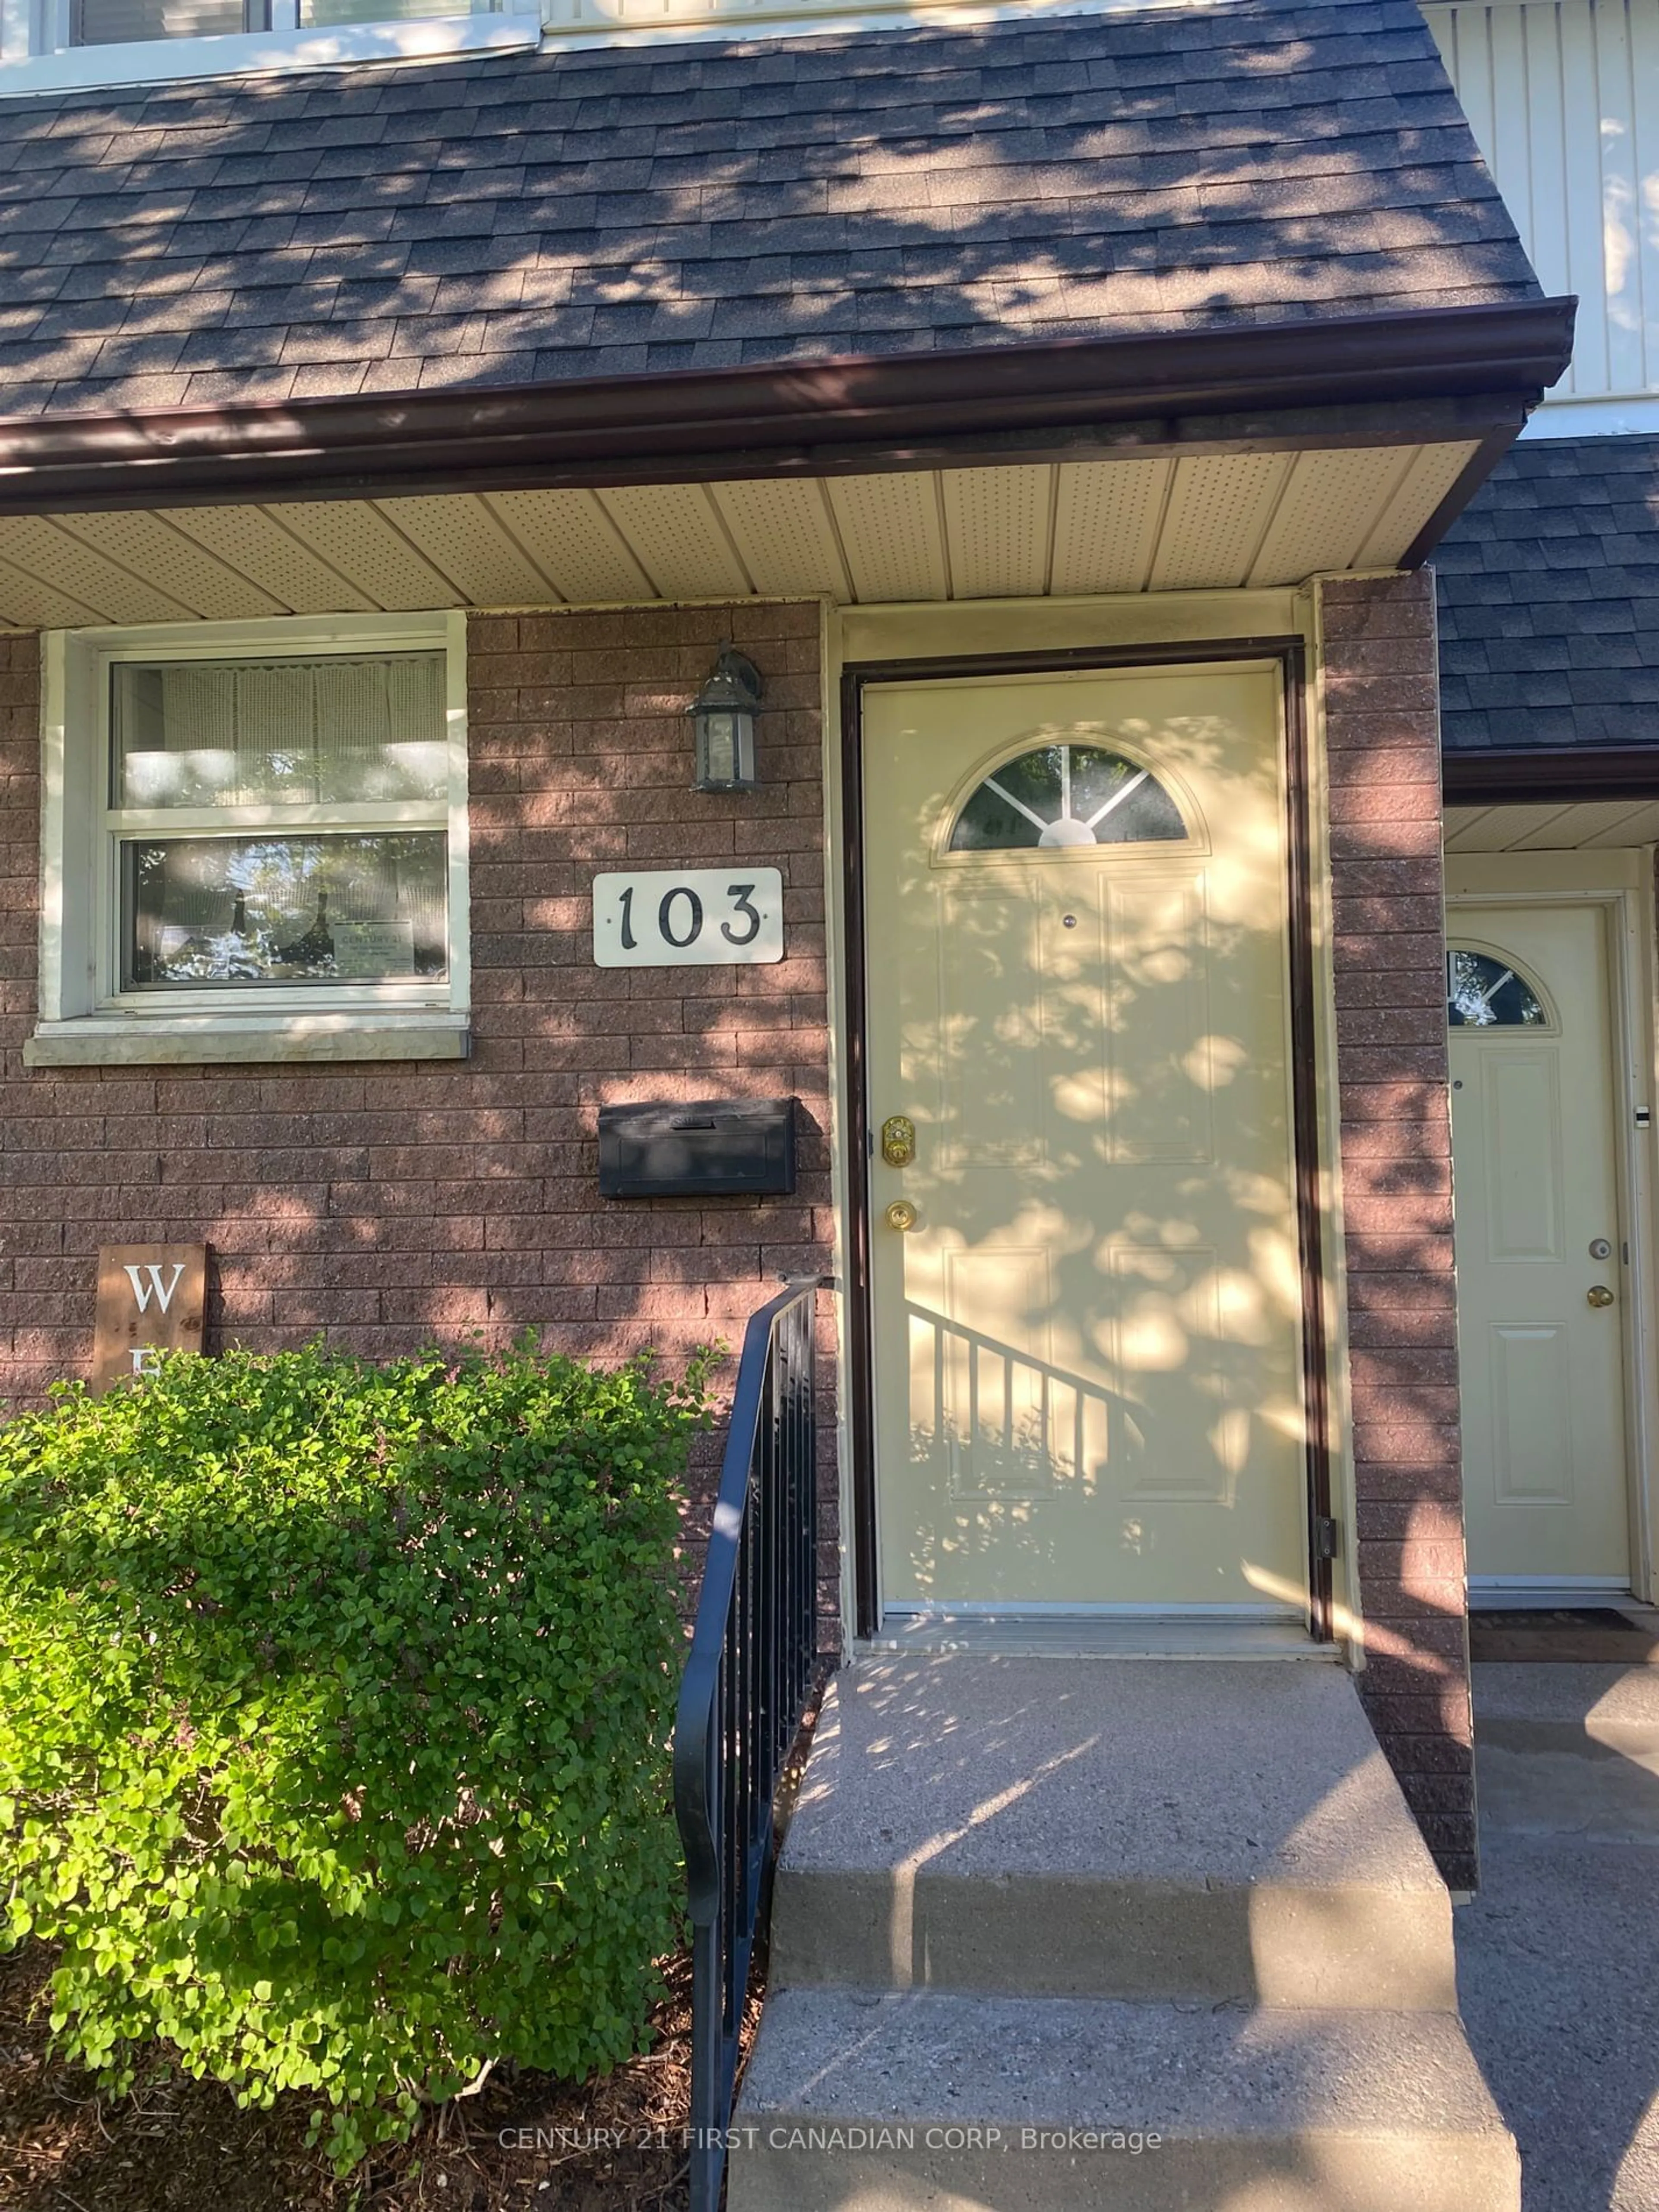 Home with brick exterior material for 1919 Trafalgar St #103, London Ontario N5V 1A1